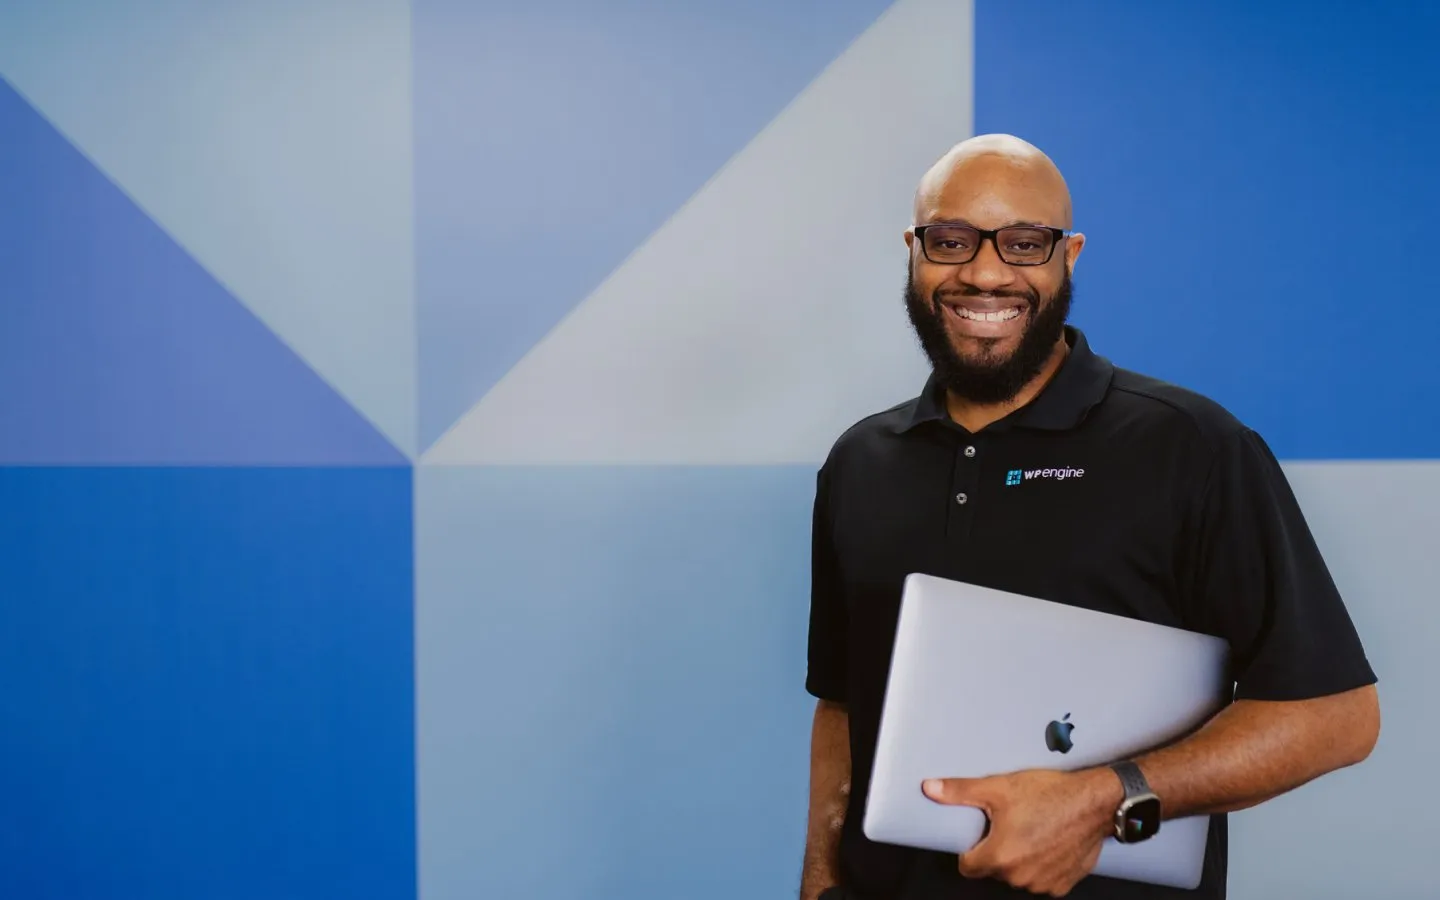 WP Engine employee smiling with laptop in hand